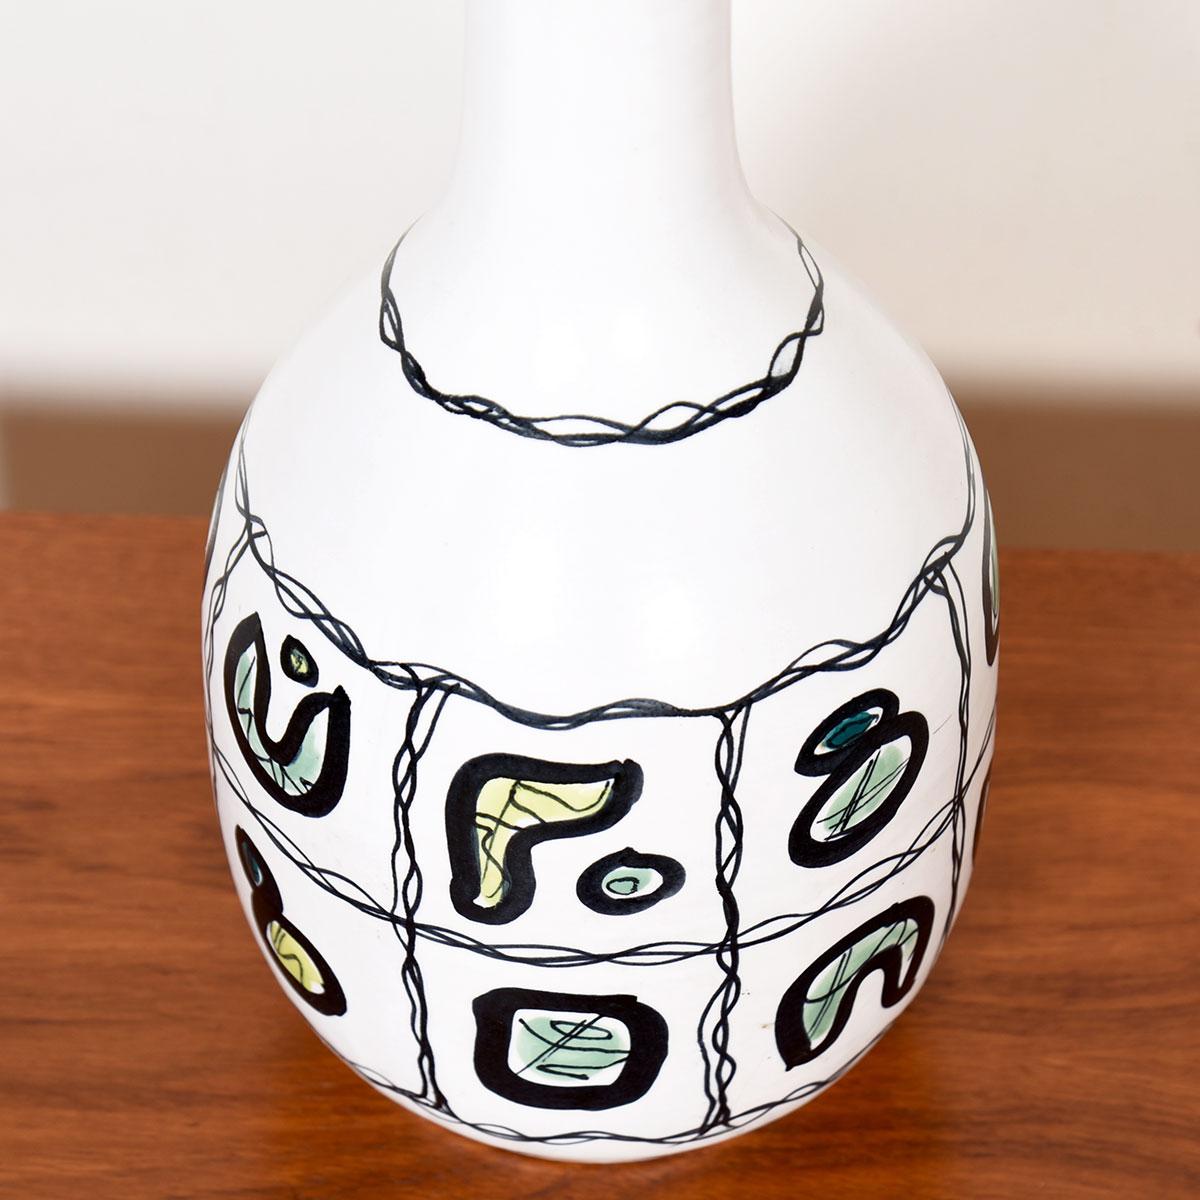 MCM Italian Pottery Table Lamp

Additional information:
Featured at Kensington
This Italian pottery or majolica lamp takes a classic form but with unusual decoration. Painted matte white, the “bulb” of the lamp has been adorned with free-form